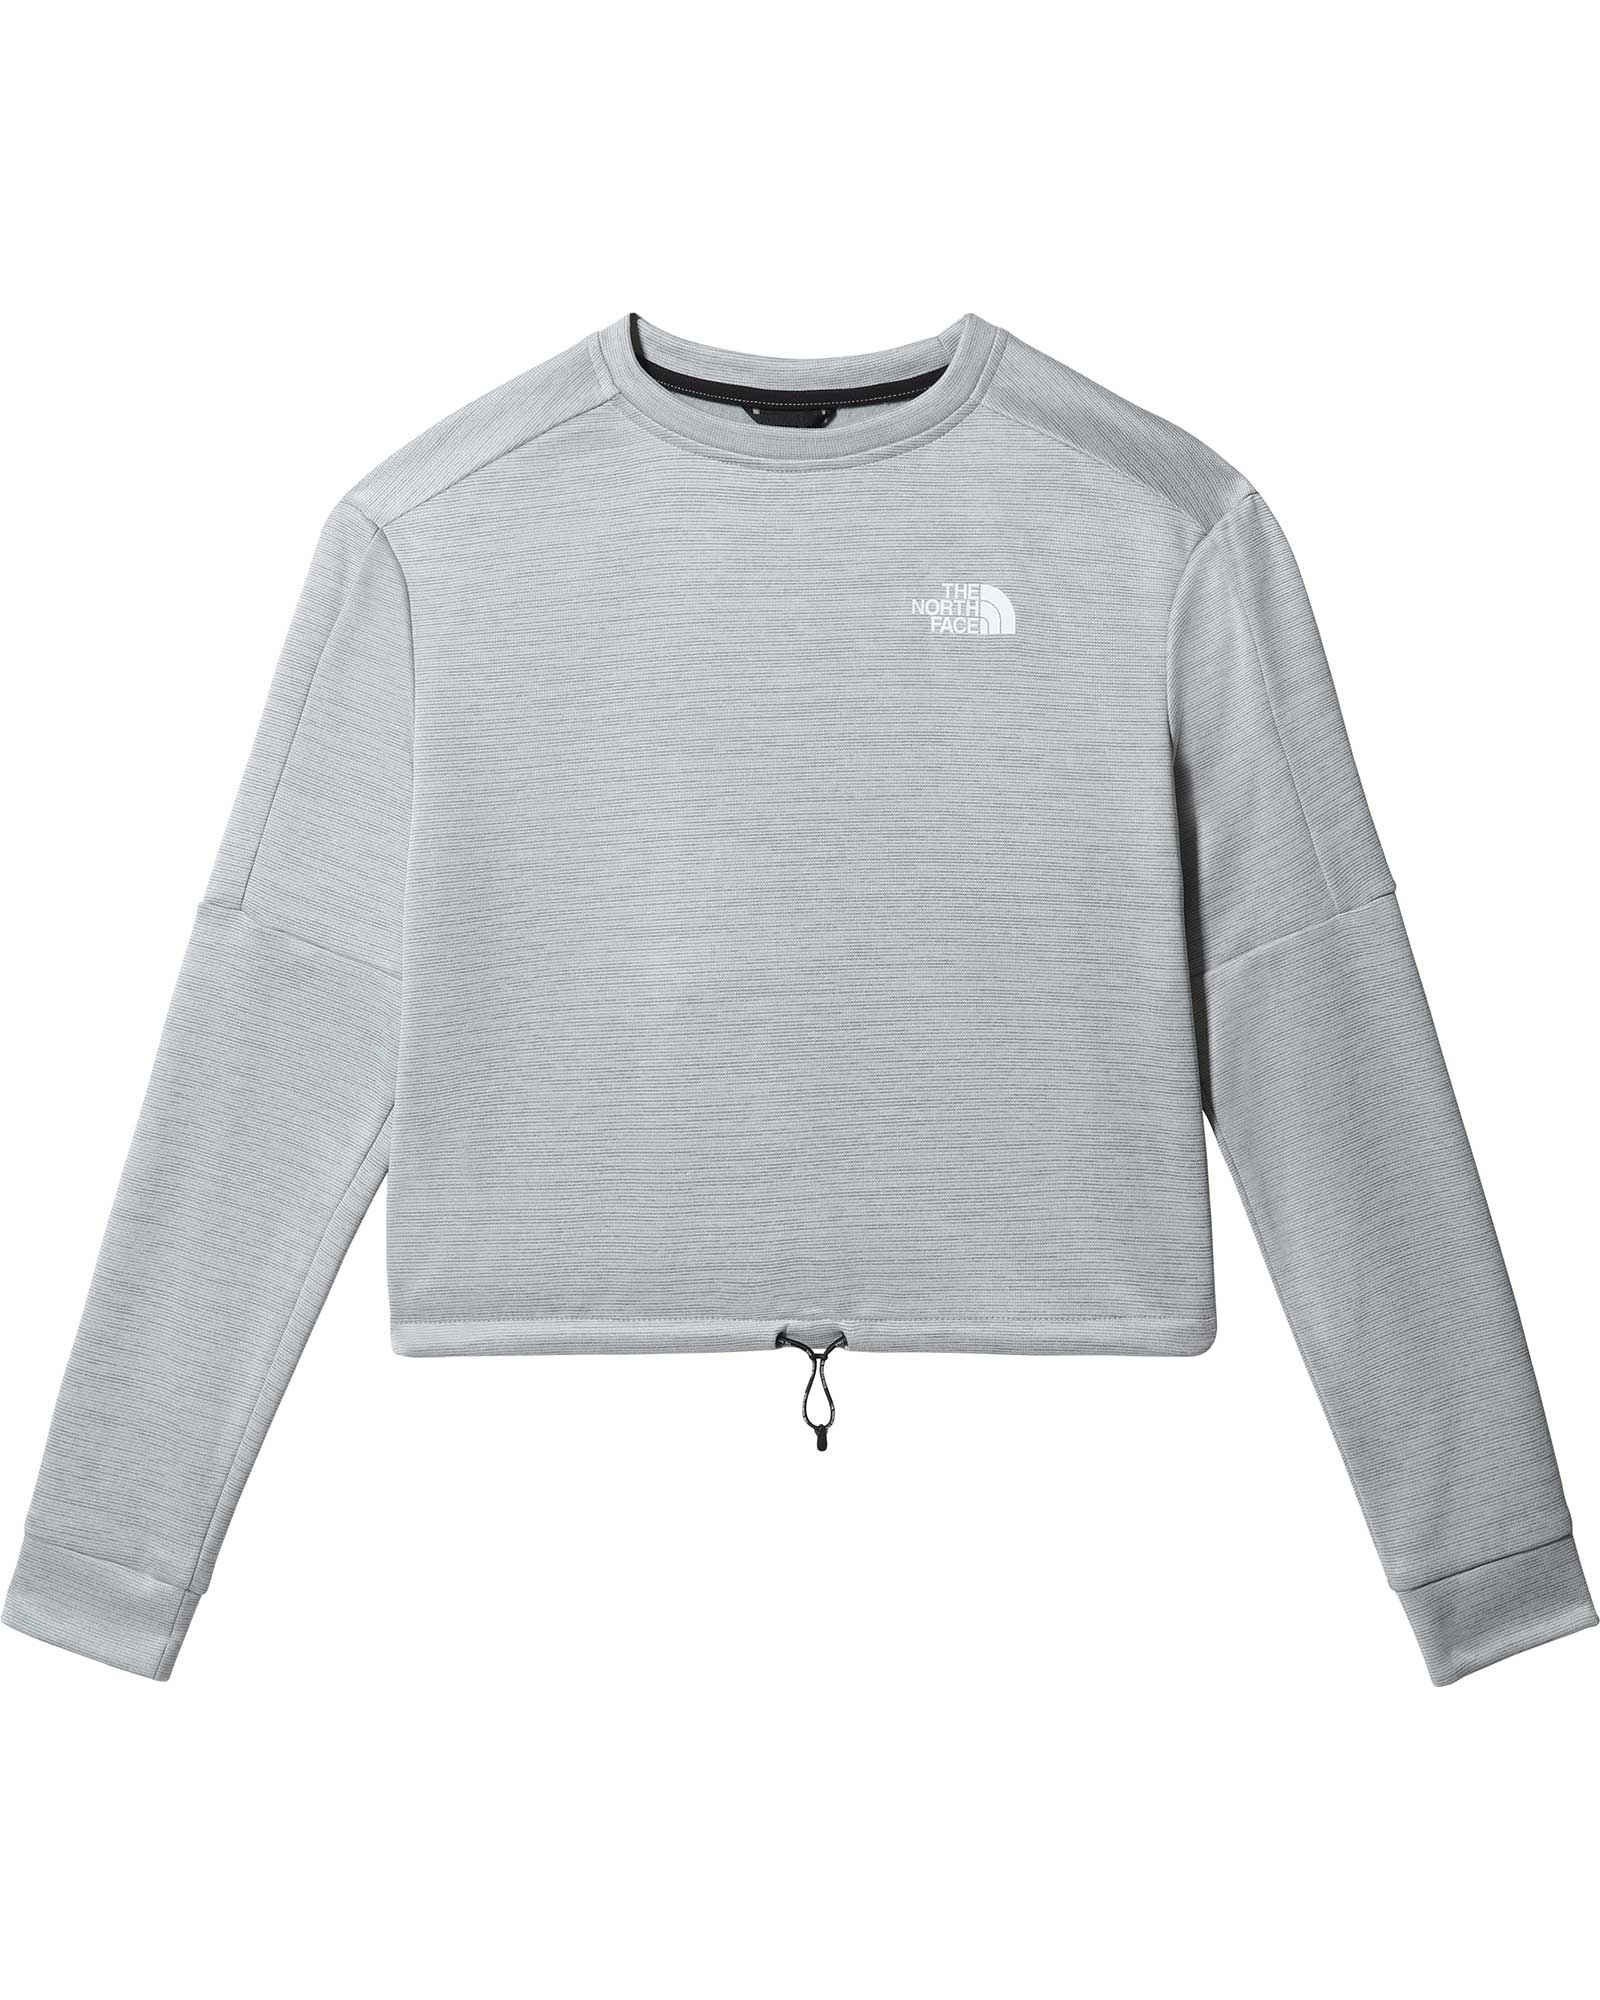 Product image of The North Face MA Women's Crew Neck Fleece